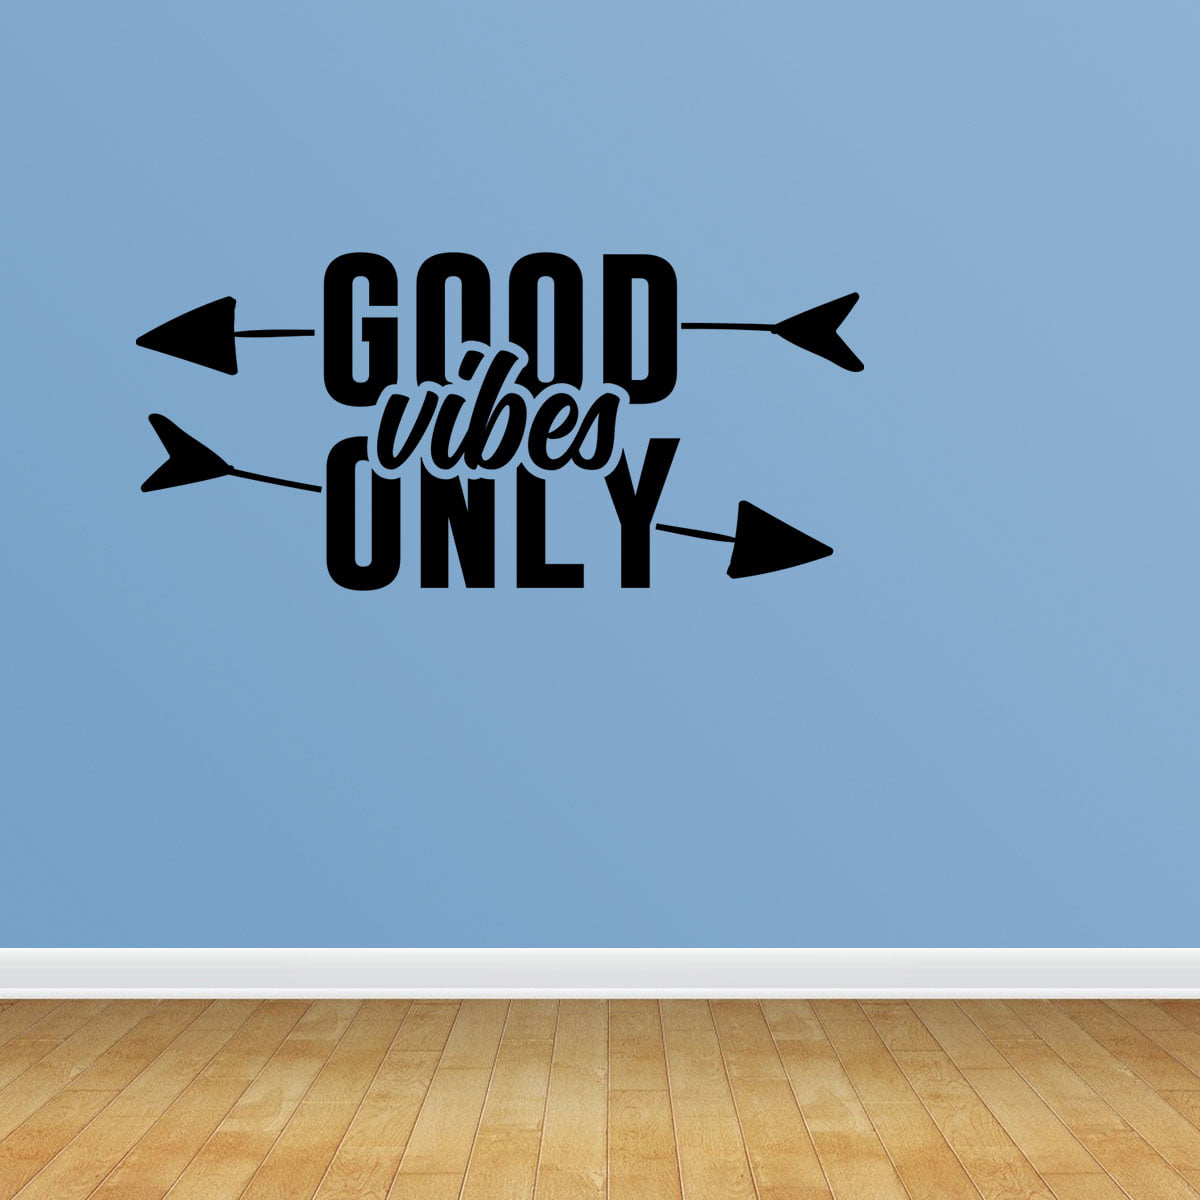 Positive Vibes Wall Decal Sticker Decor 